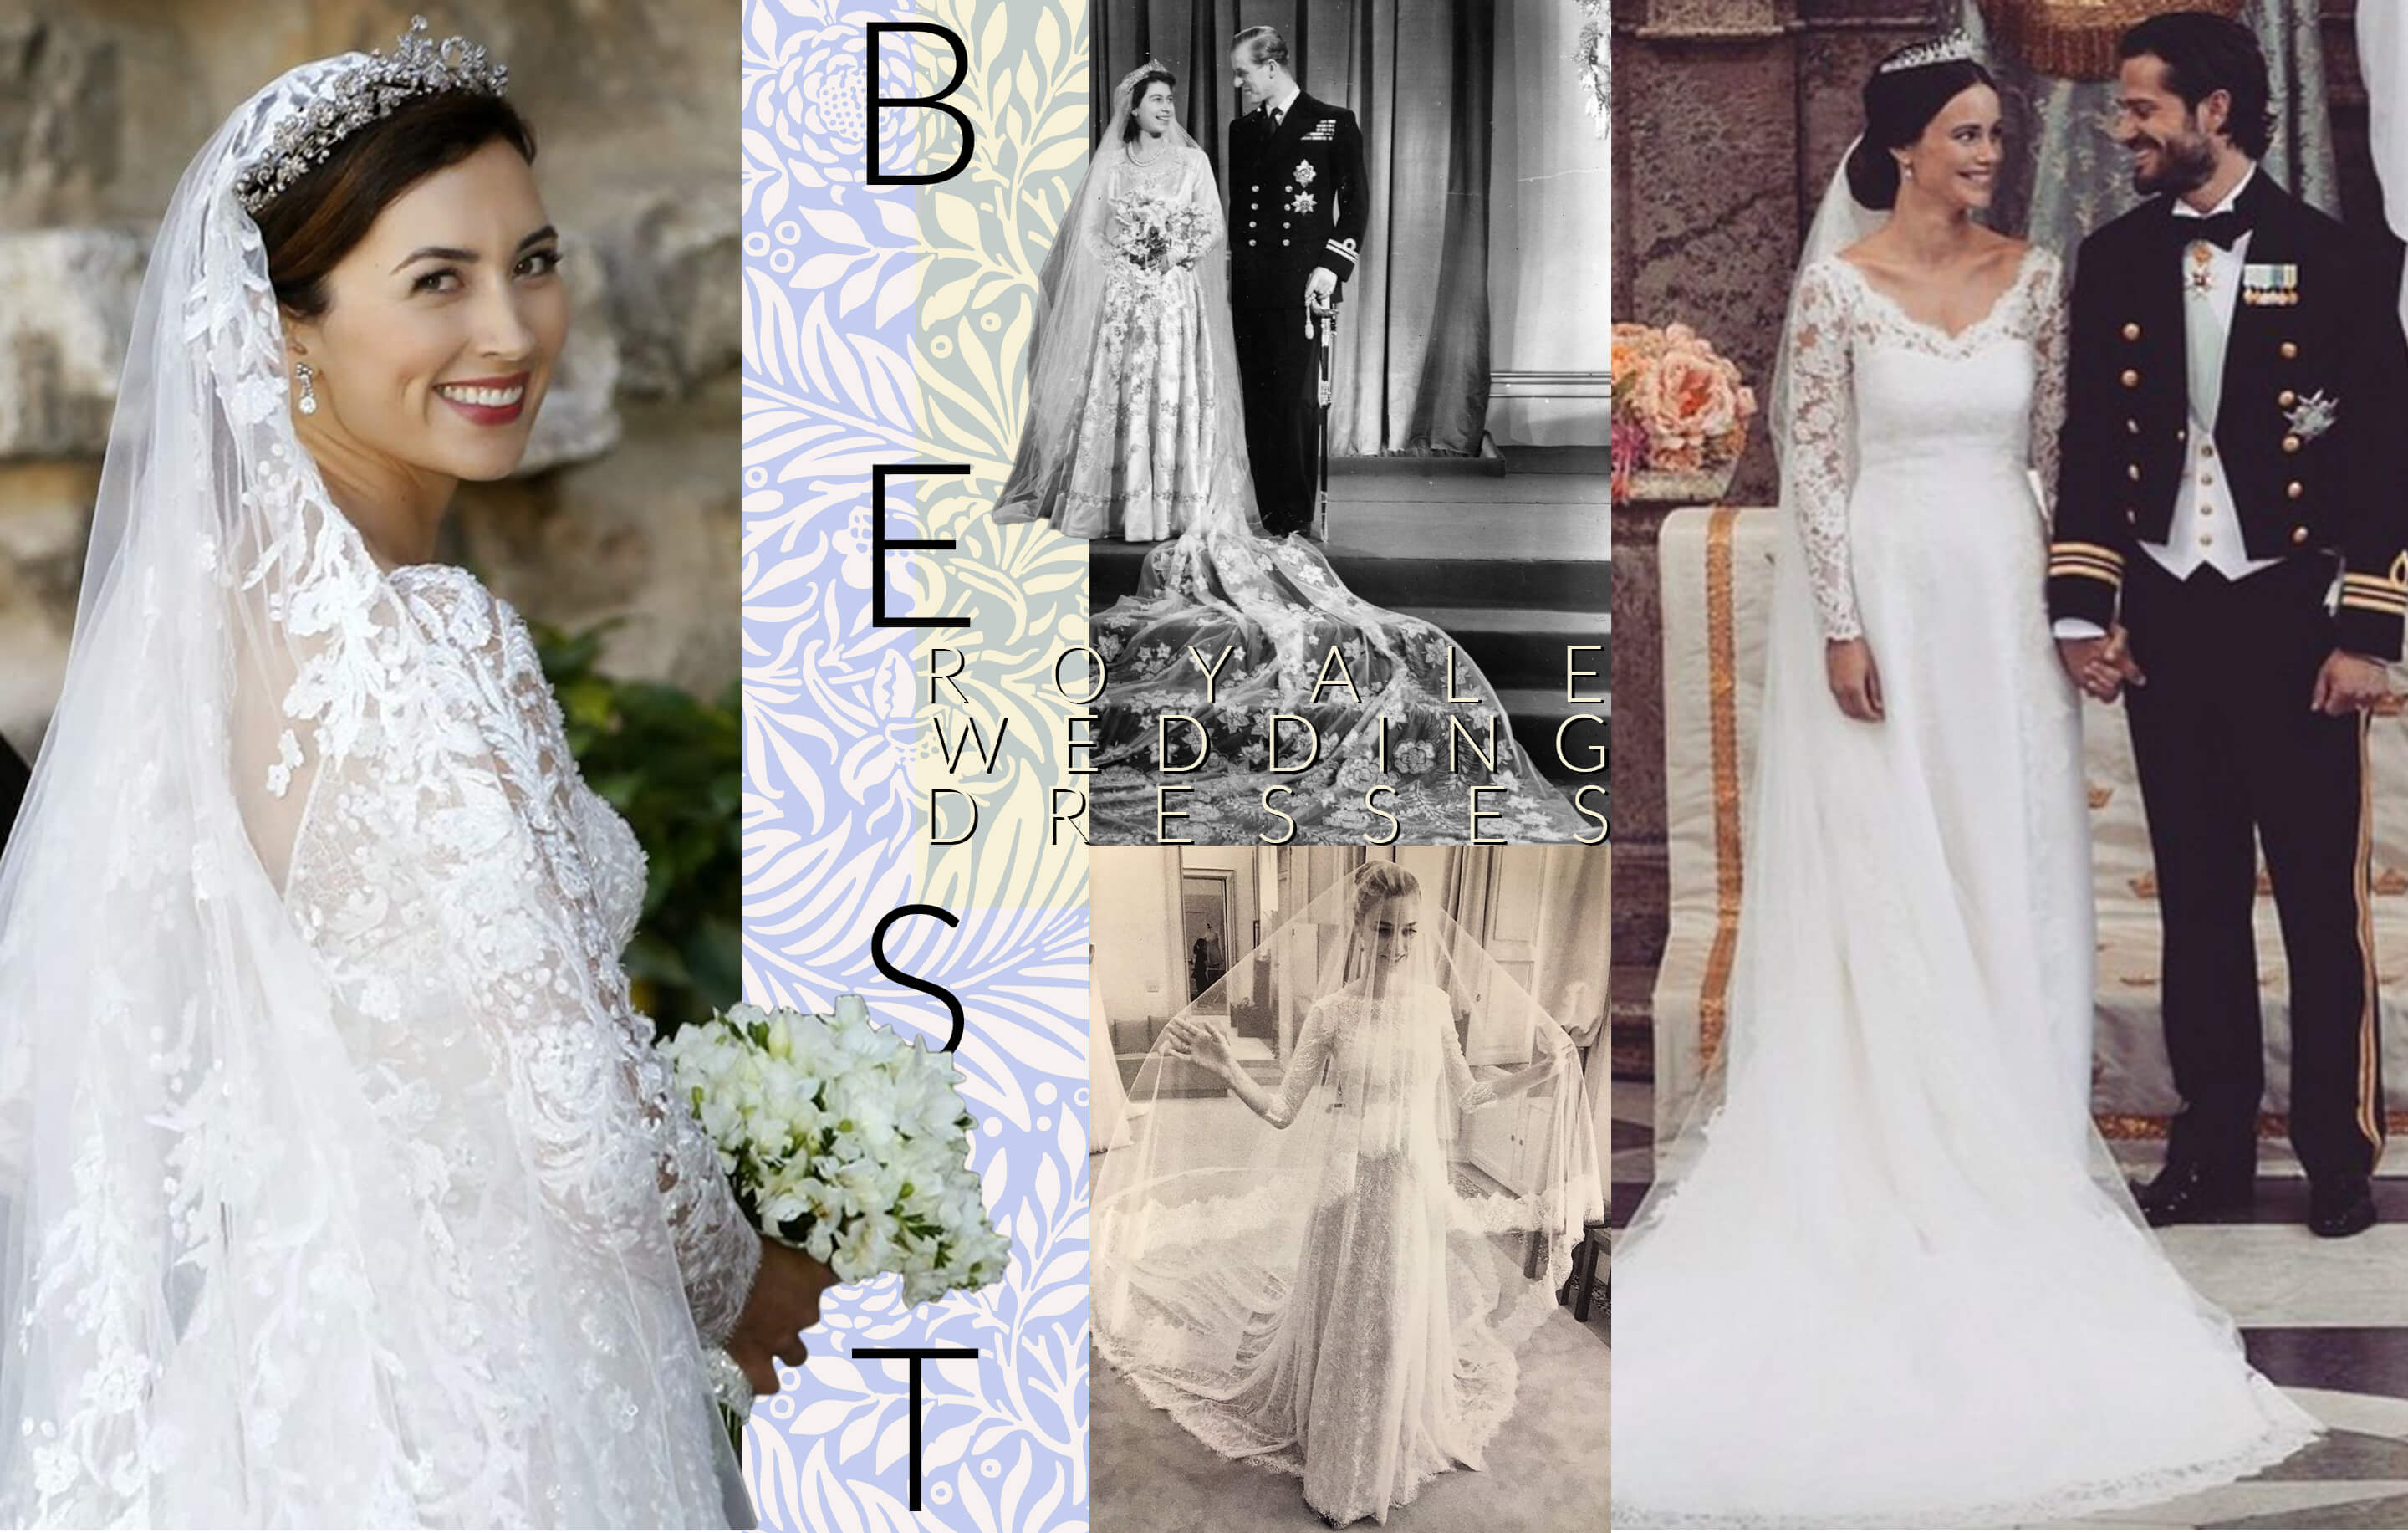 8 Royal Wedding Dress Traditions That Brides Follow - Royal Wedding Gown  Rules